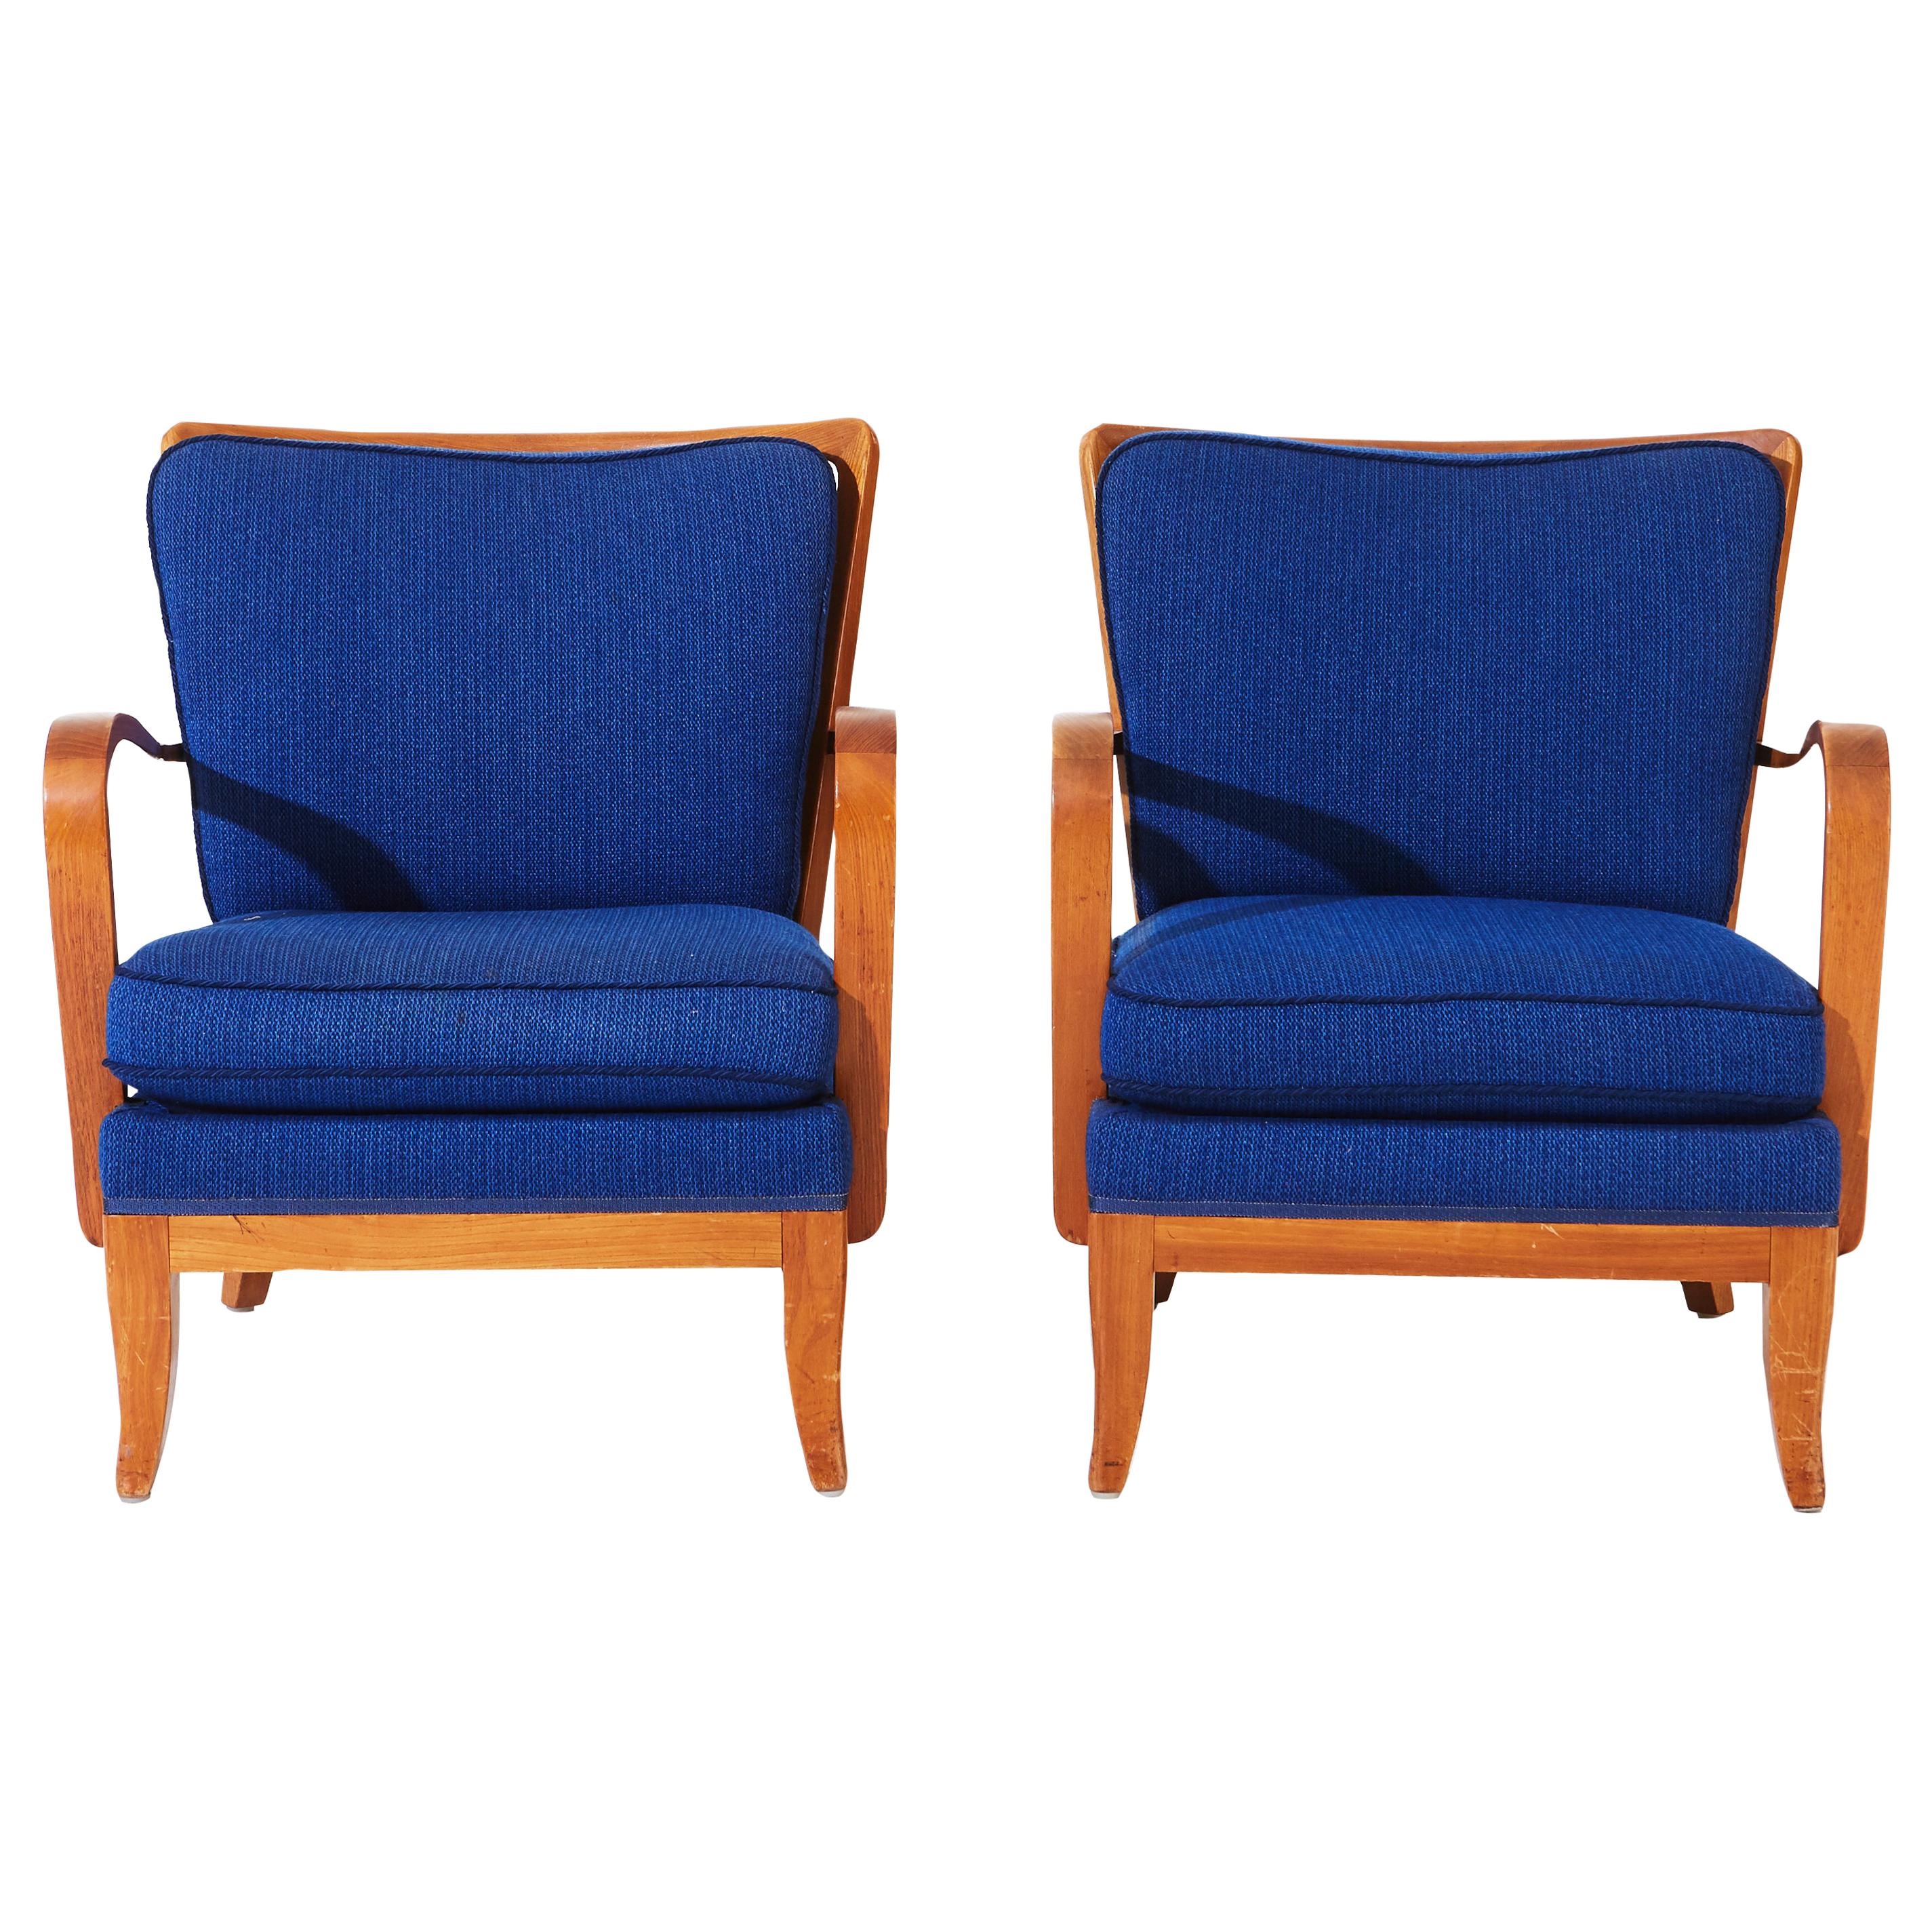 Pair of Mid Century Modern Accent Lounge Chairs with Blue Upholstery